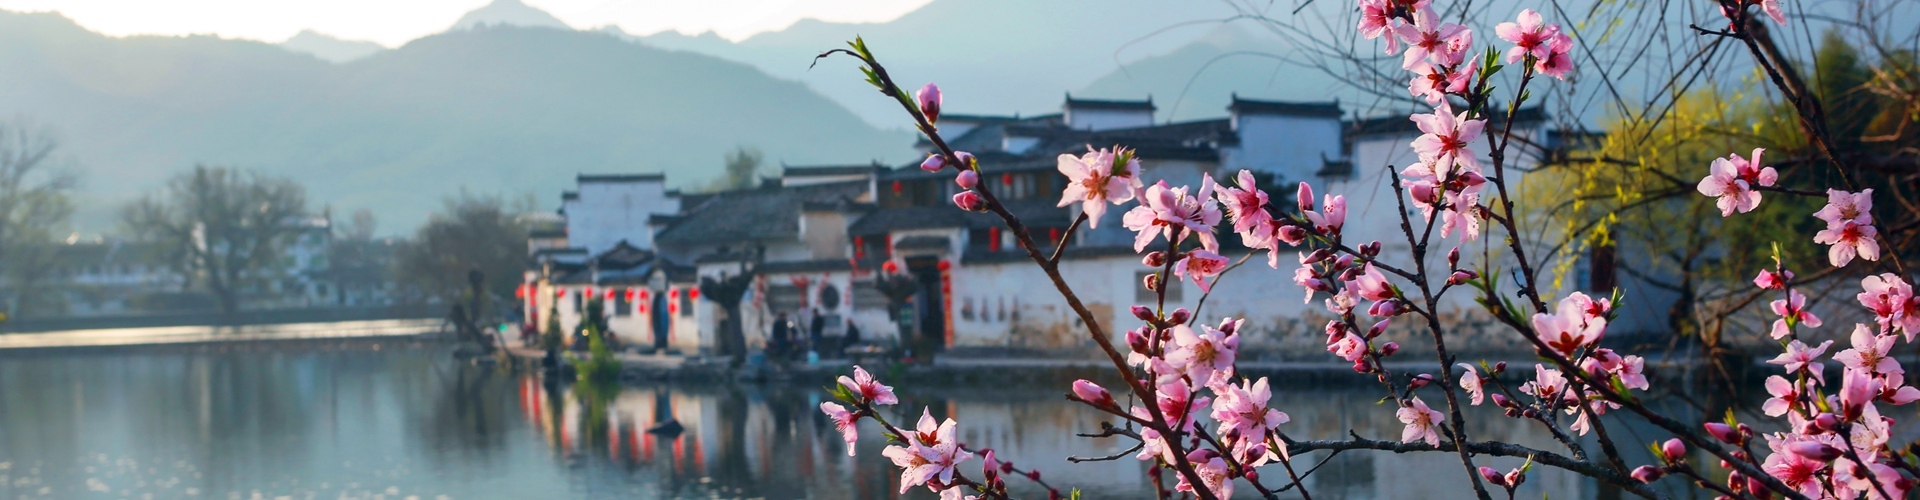 Hongcun Village - The Well-preserved Anhui-style Architectural Complex